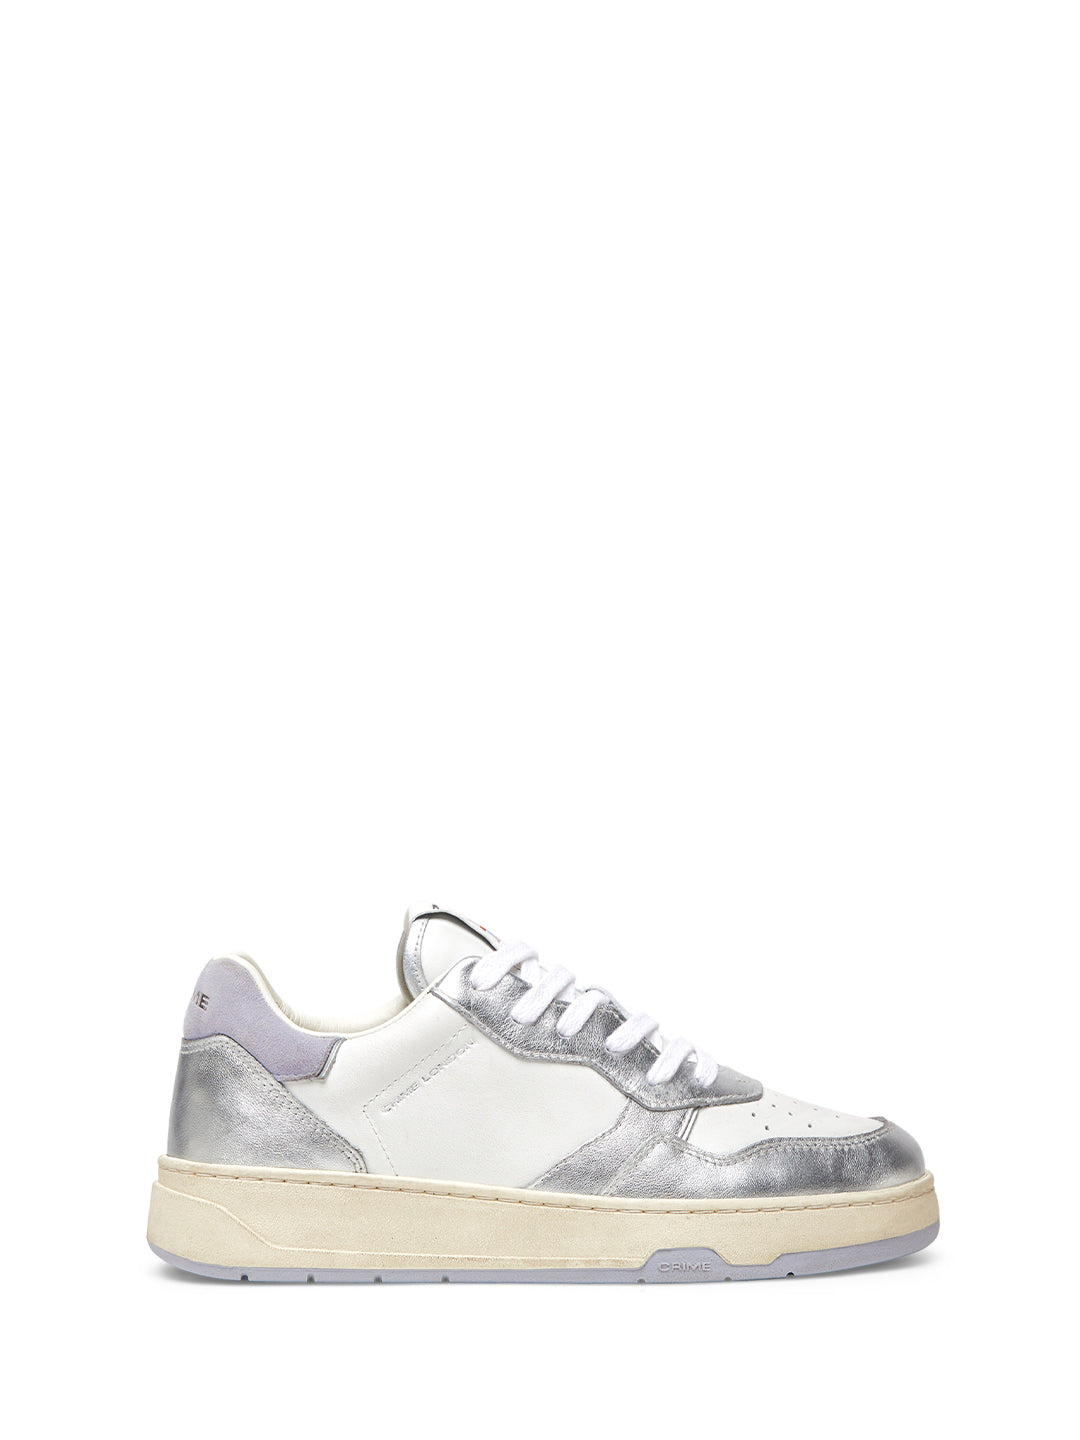 Crime Timeless To The Moon sneakers bianco con tab argento